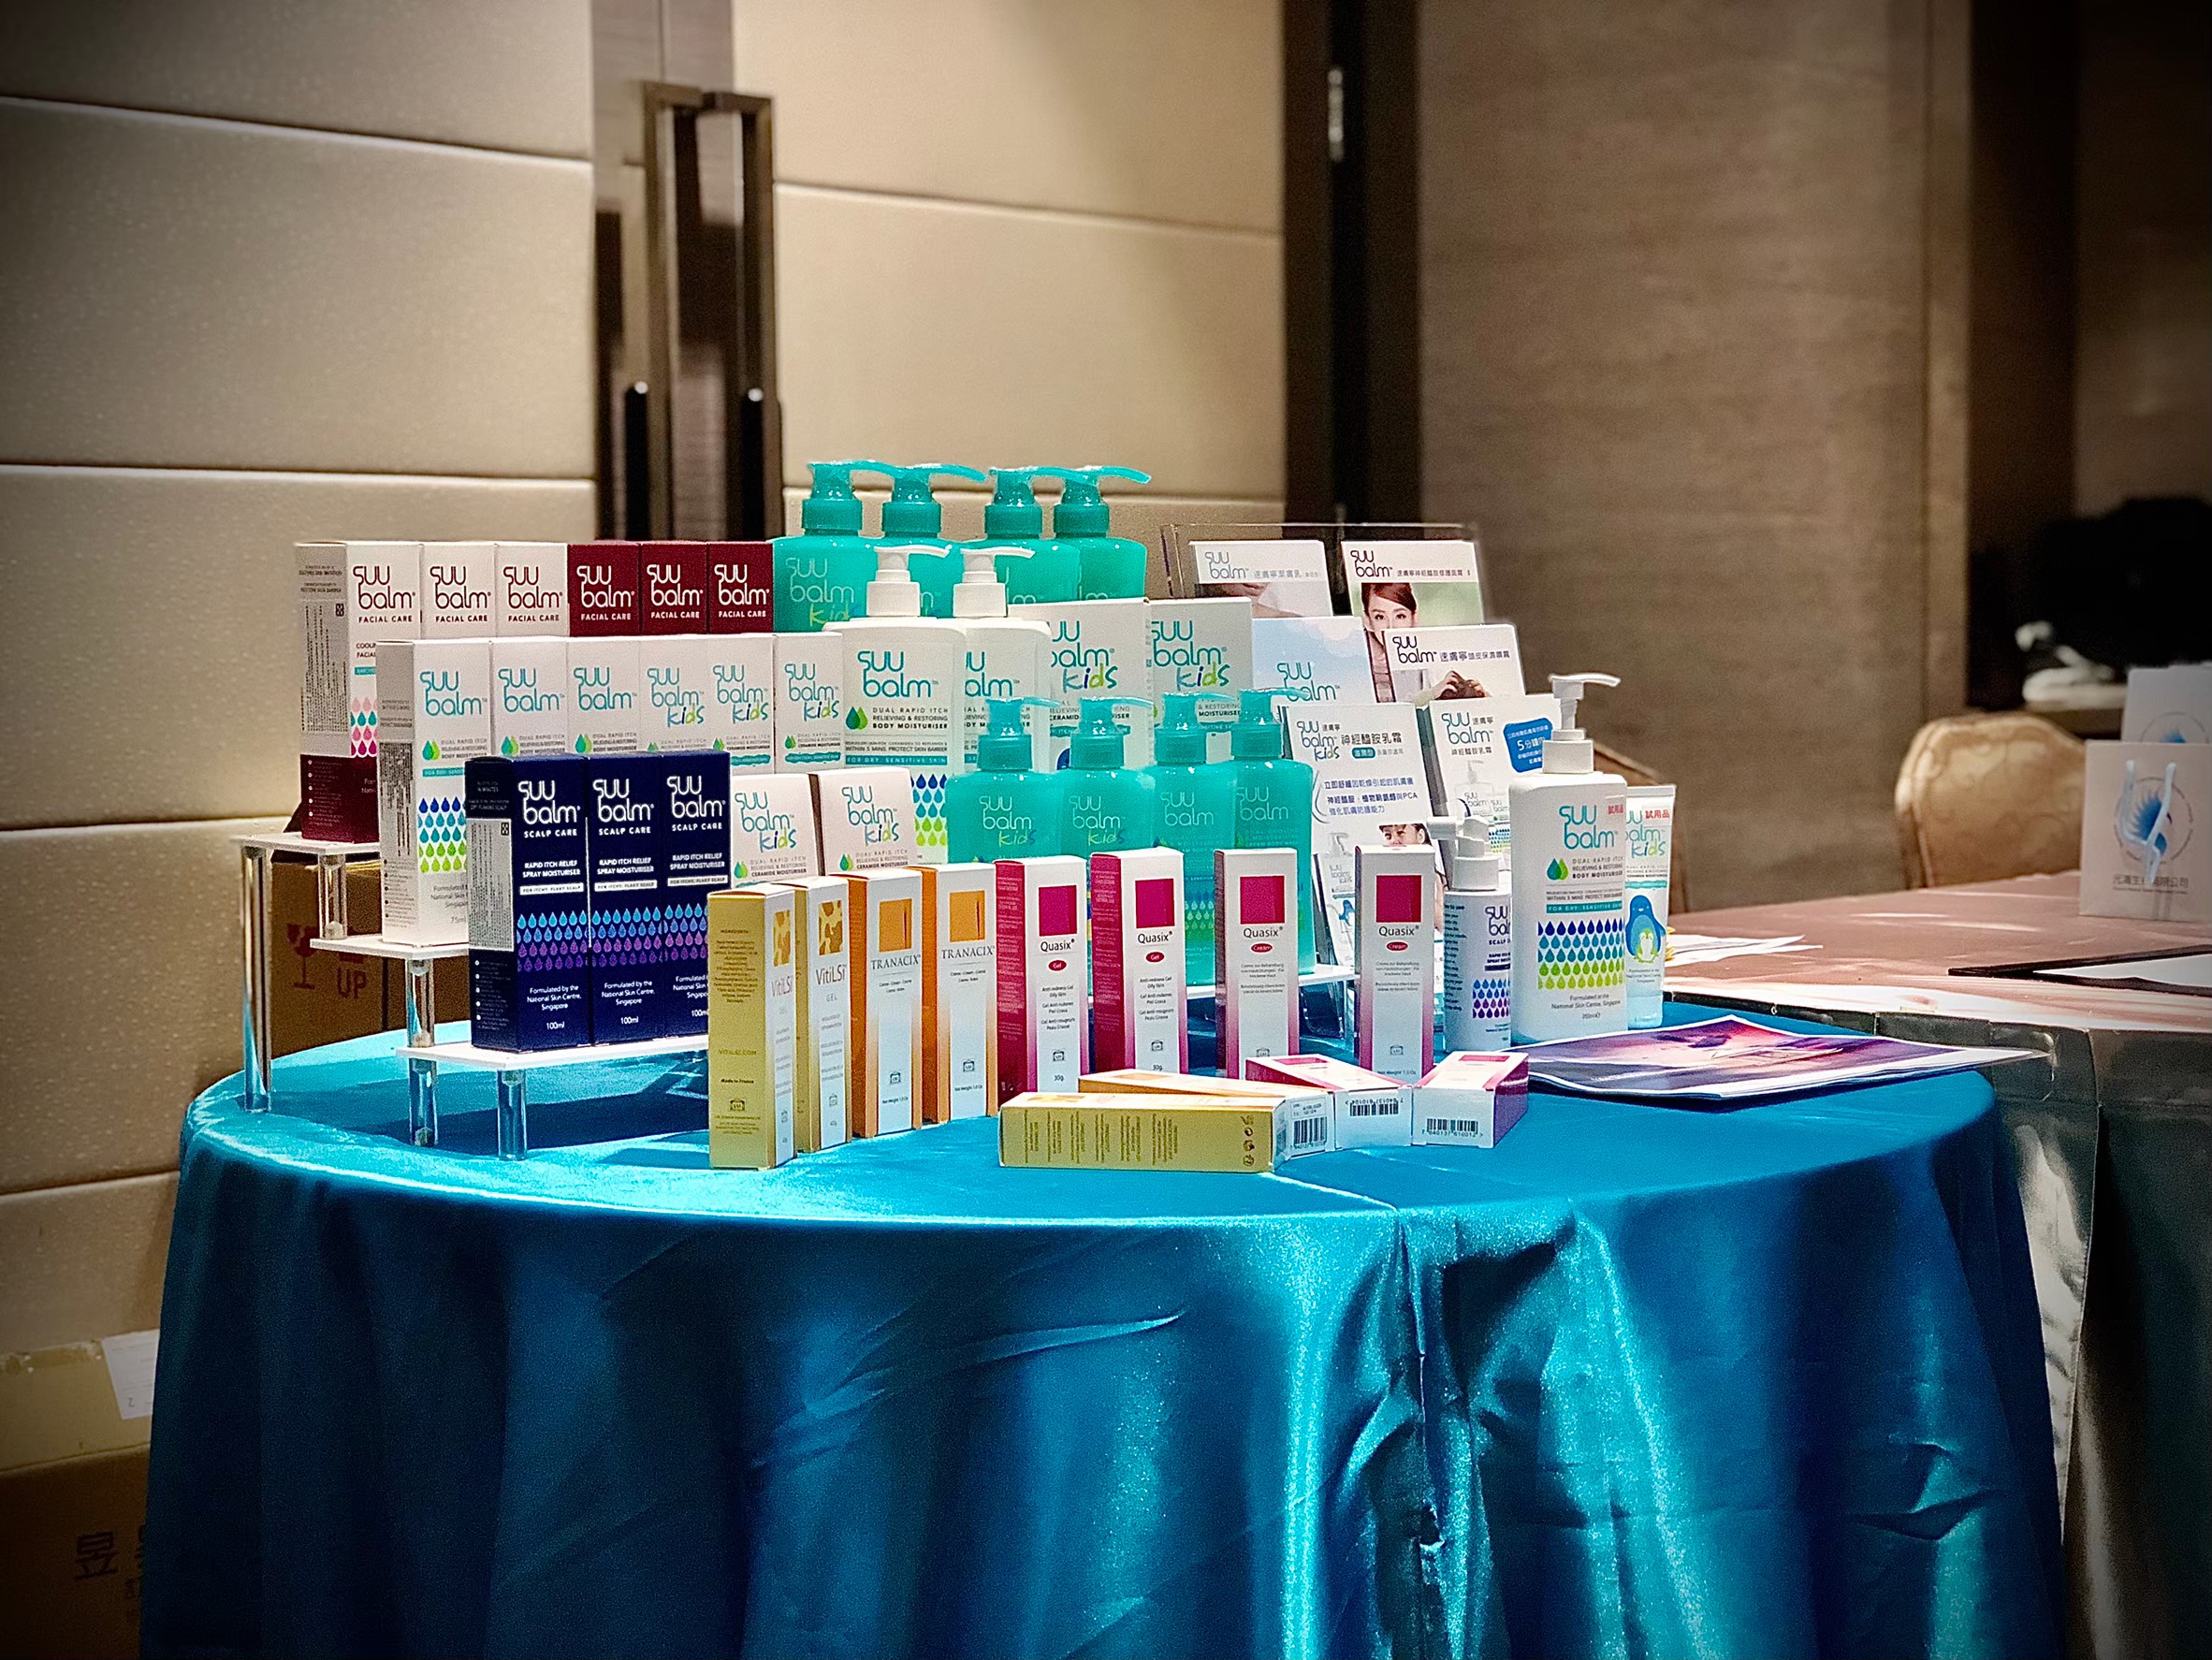 Over 130 Dermatologists attended our New Era of Atopic Dermatitis Treatment Symposium in Taichung city on July 5th, 2020